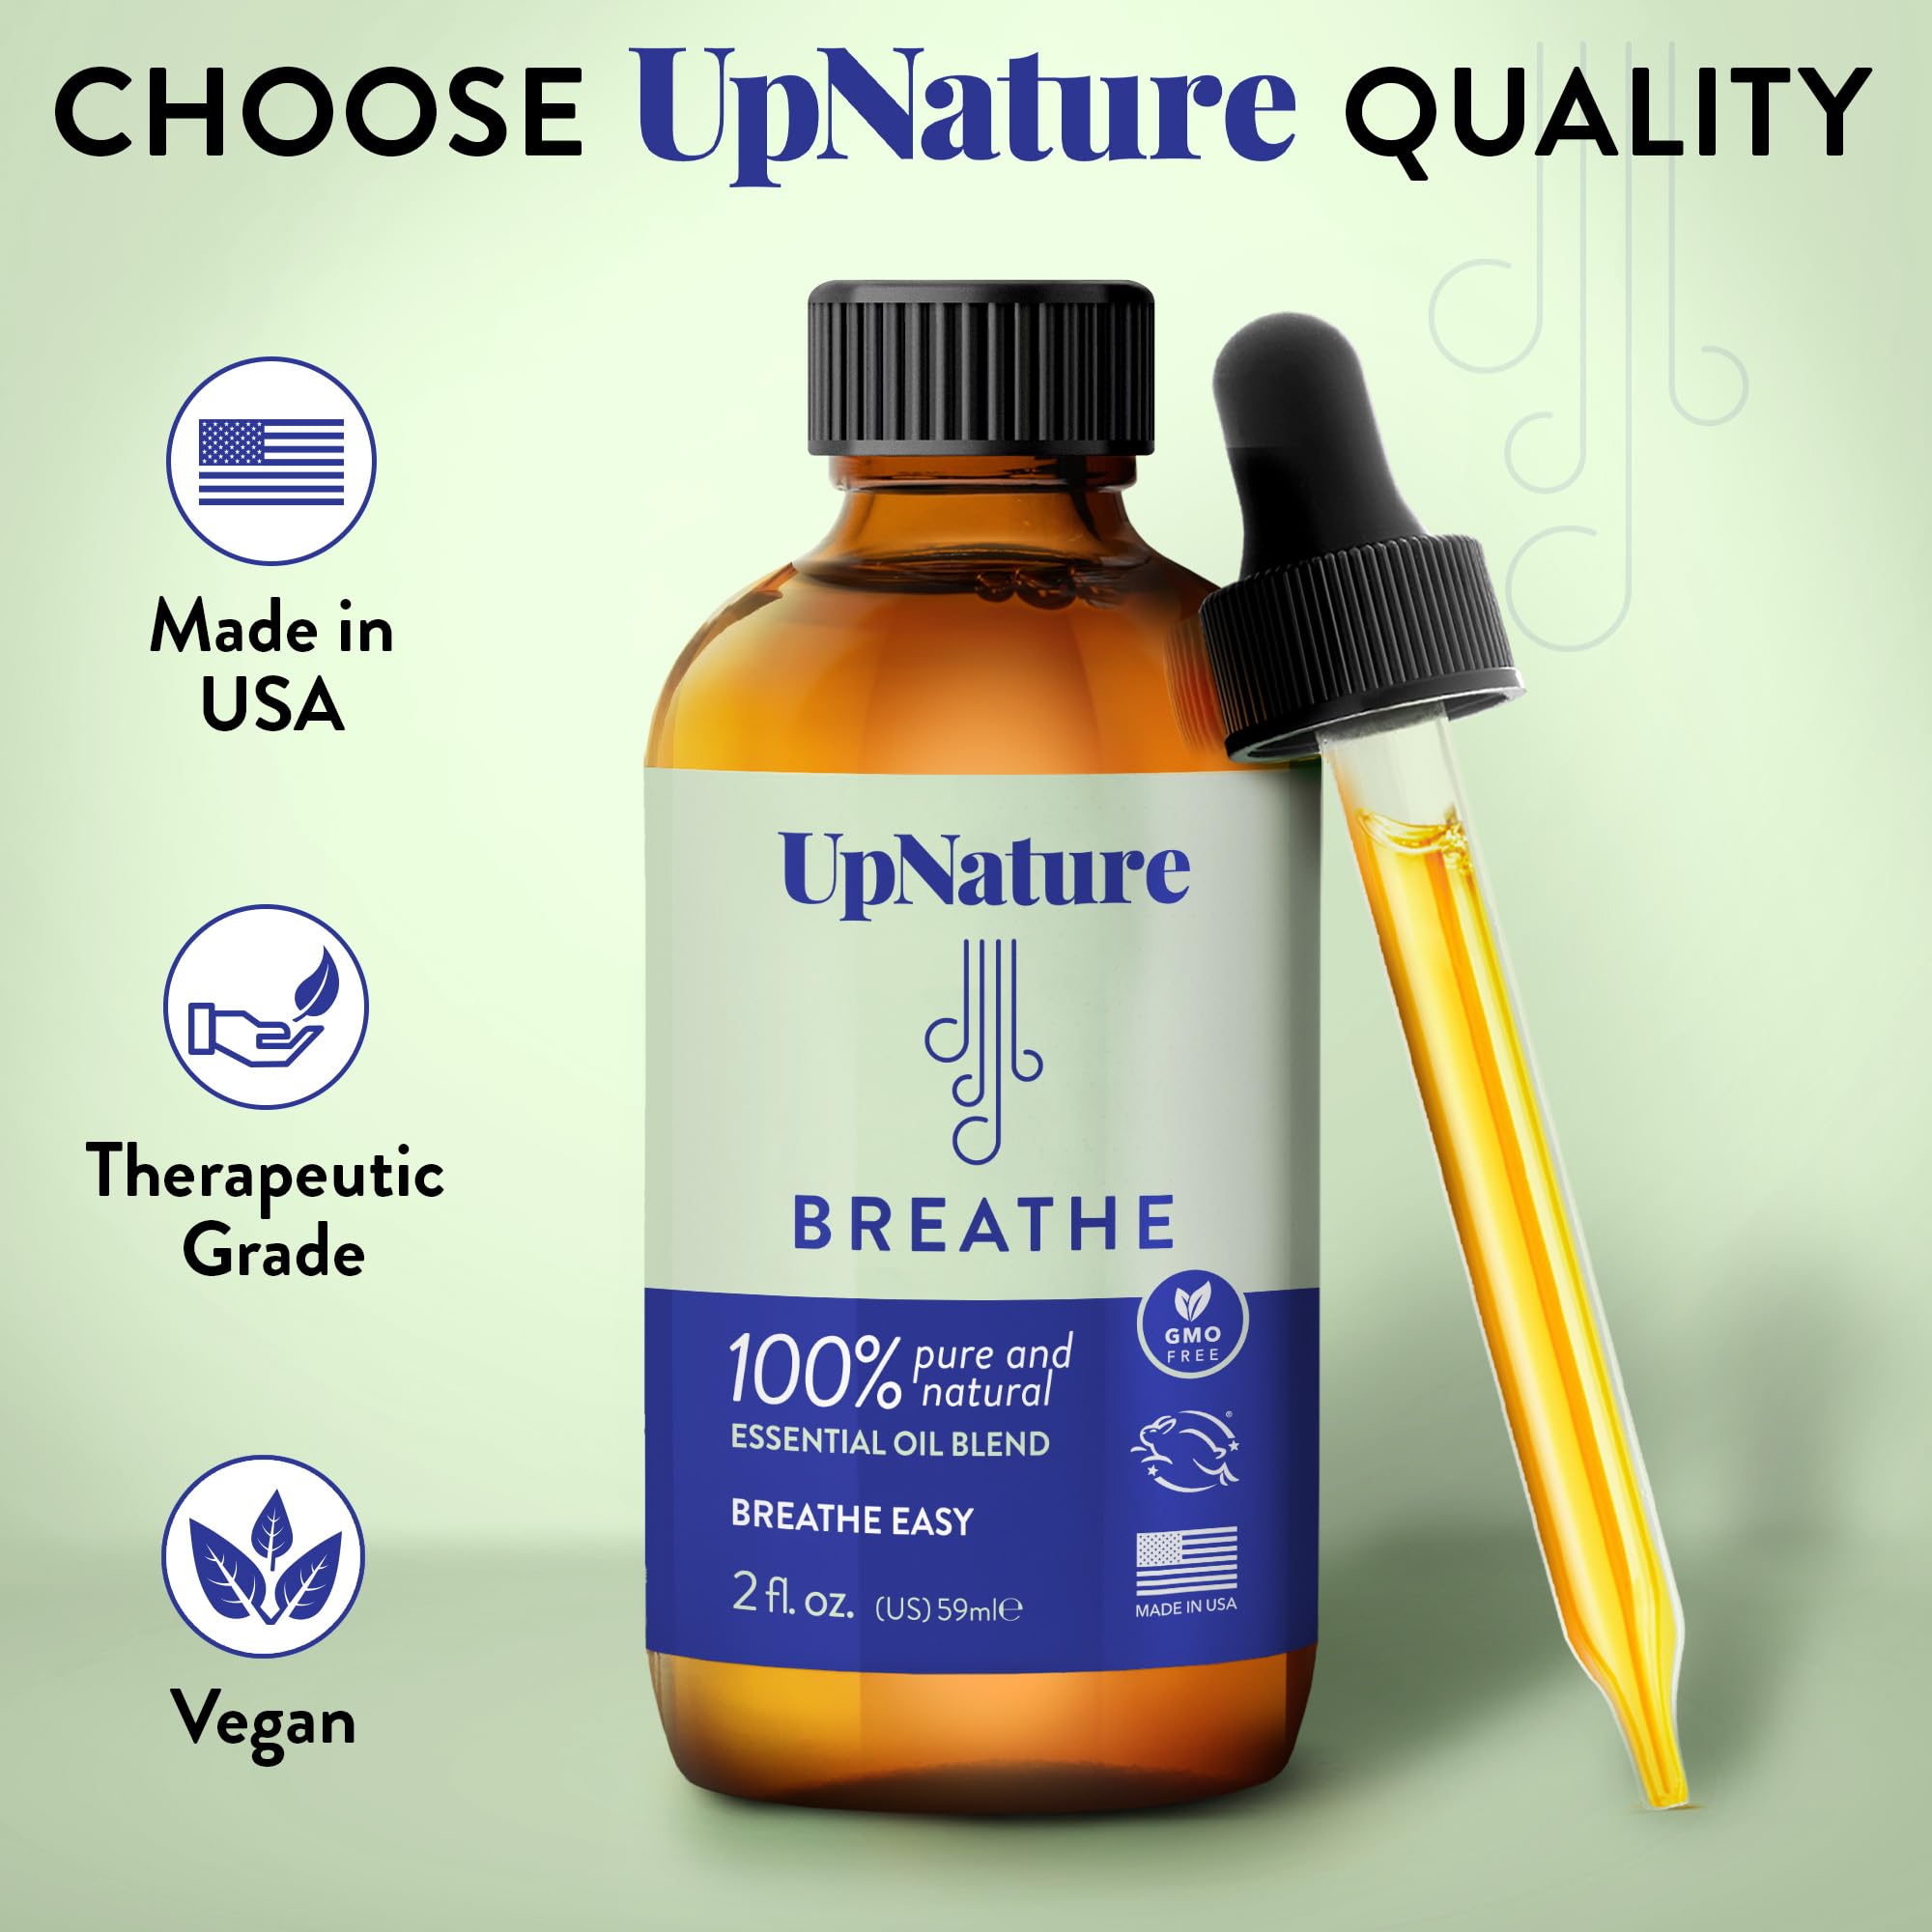 UpNature Fresh Citrus Essential Oil Blend, 2oz - Pure, Undiluted, Natural, Non-GMO, No Toxins, Boosts Energy, Improves Focus, Calms, Promotes Skin Health, Made in USA